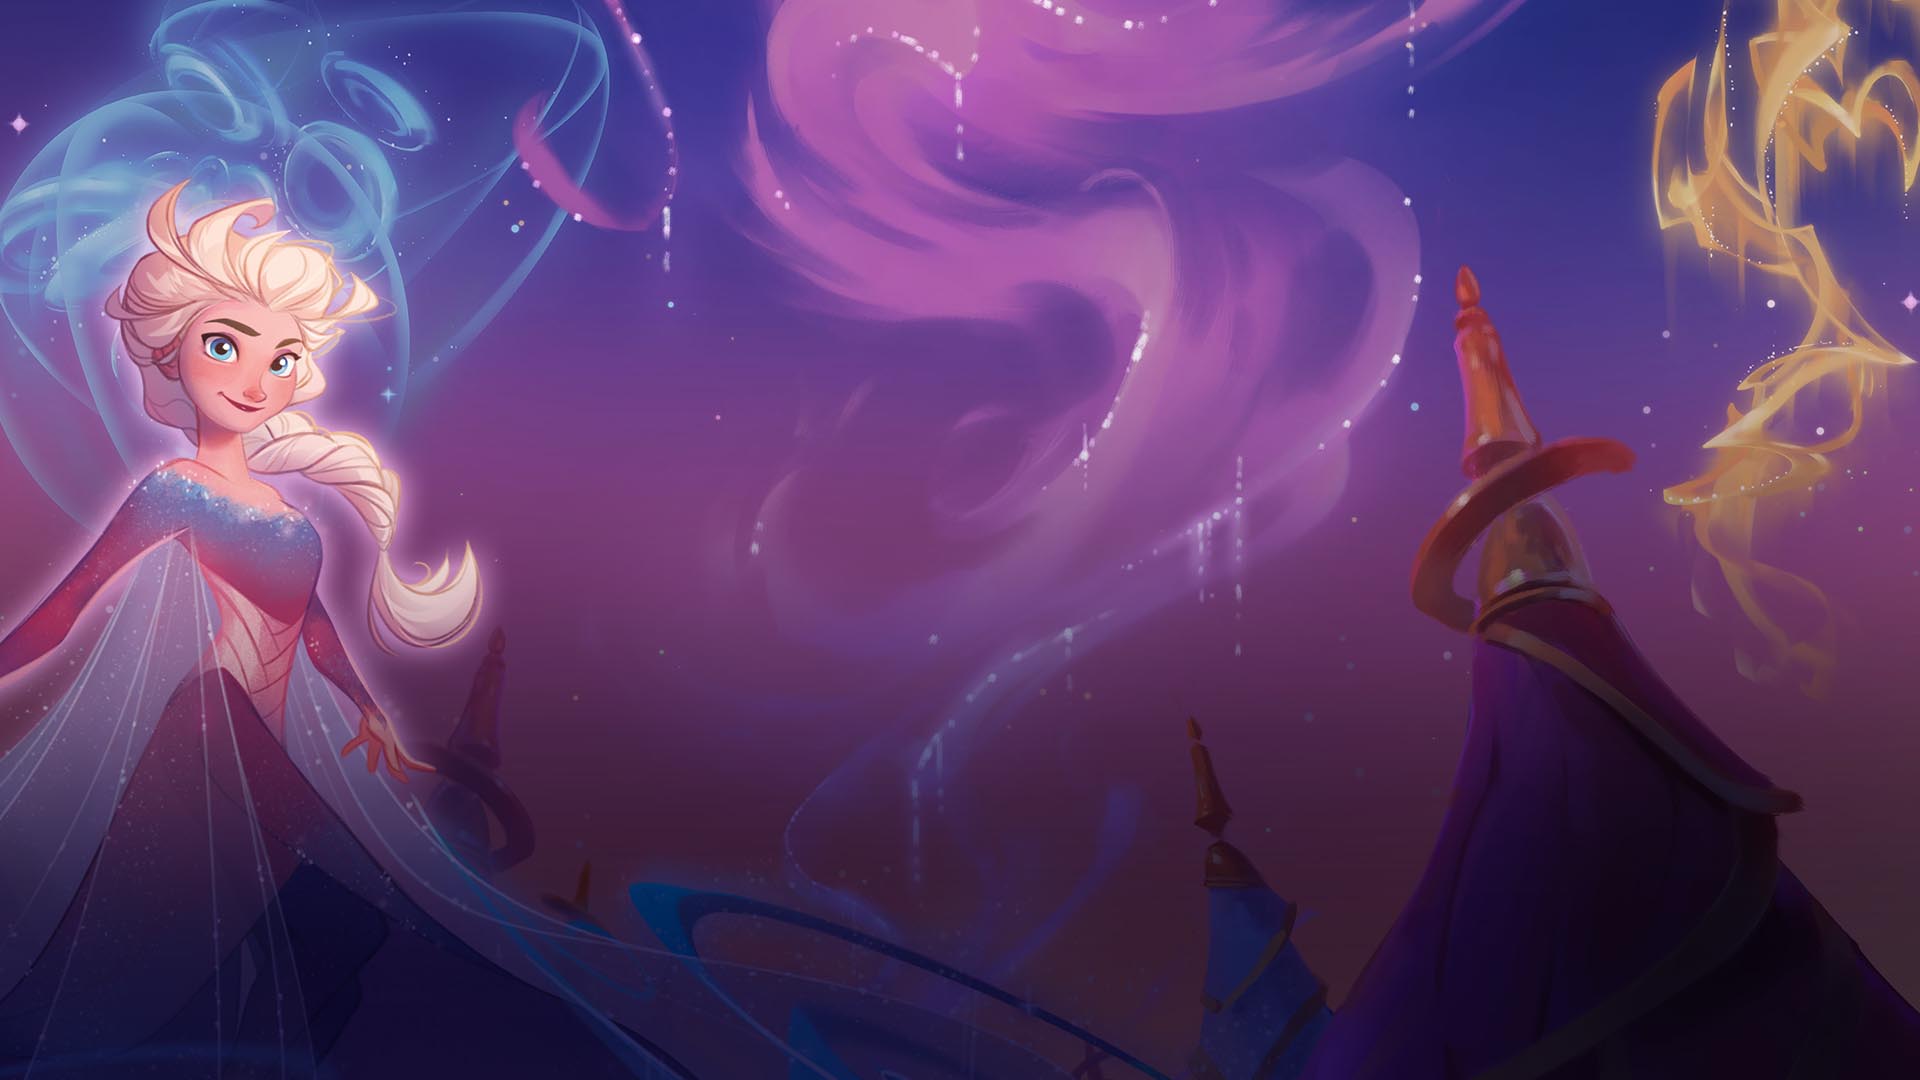 Decorative background image showing Elsa on the left and swirling designs on the right